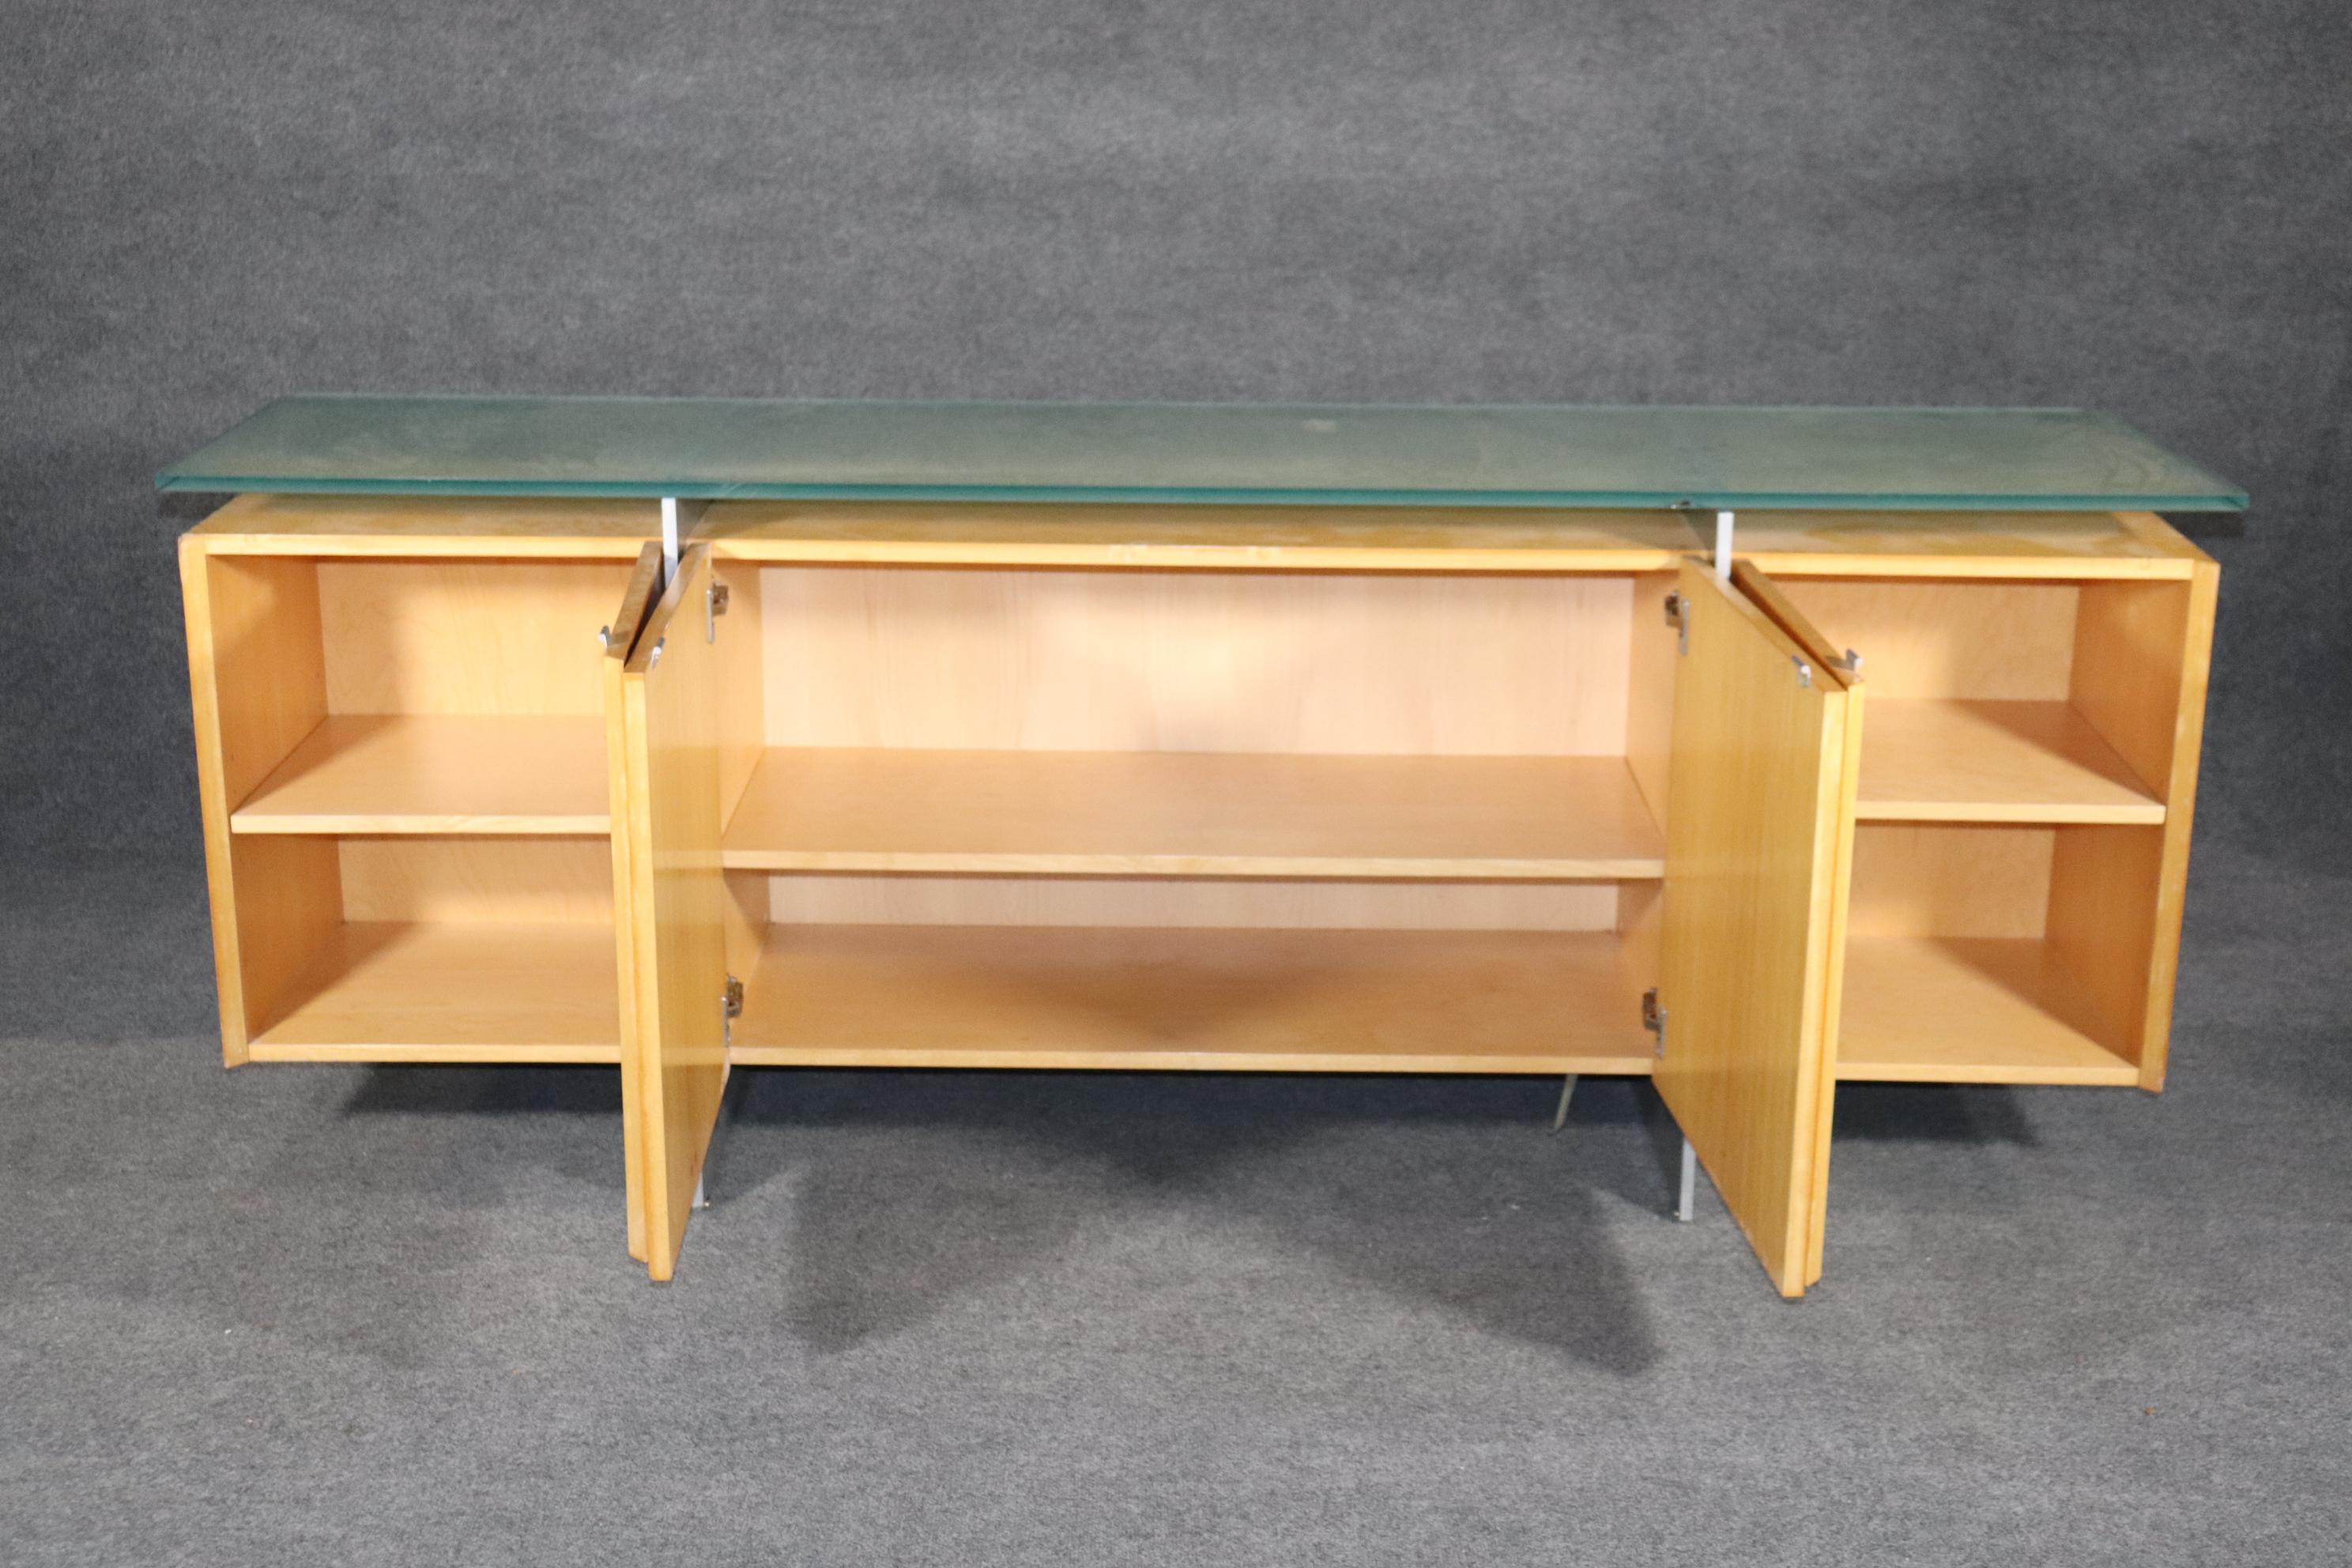 Sleek sideboard with frosted glass top and metal legs. Comes out of Vladimir Kagan's workshop!
Please confirm location NY or NJ.